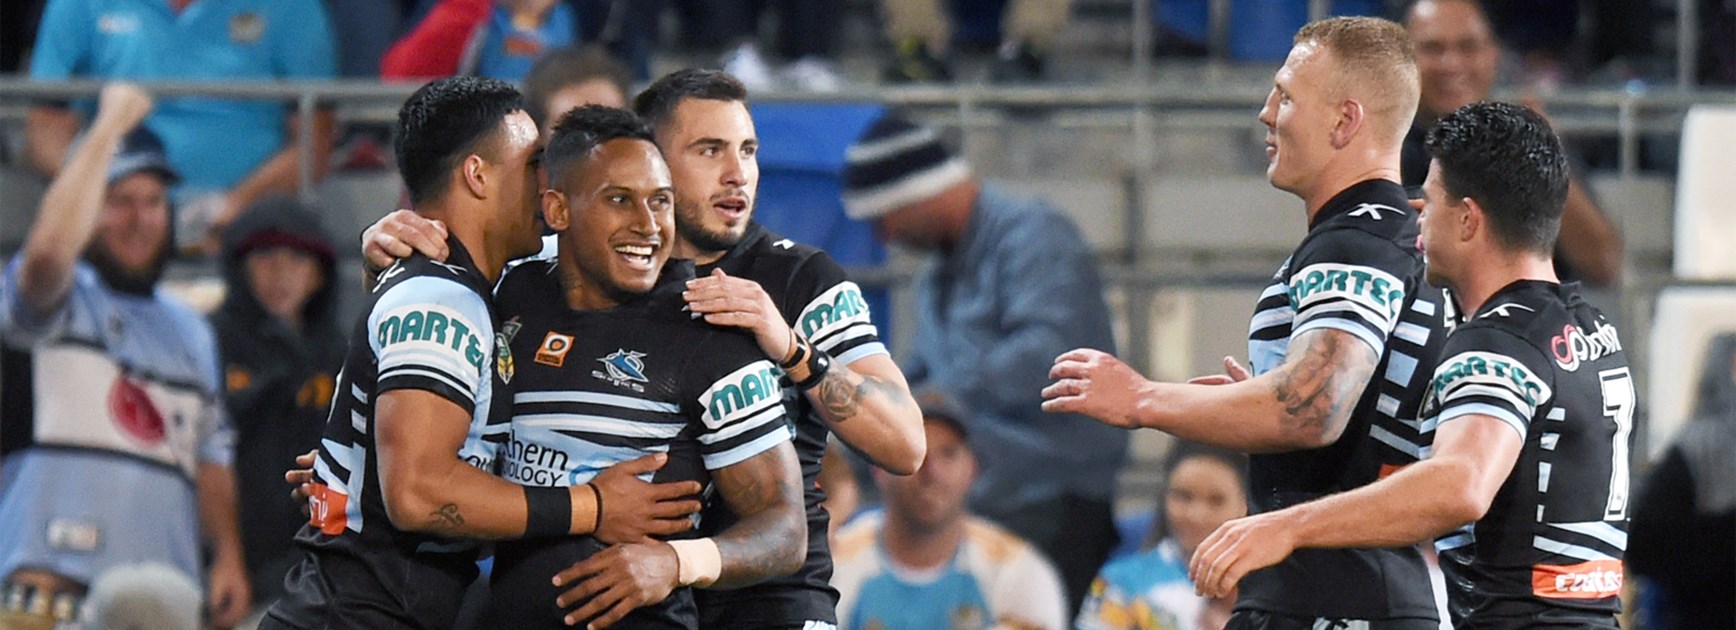 The Sharks celebrate a first-half try against the Titans in Round 21.